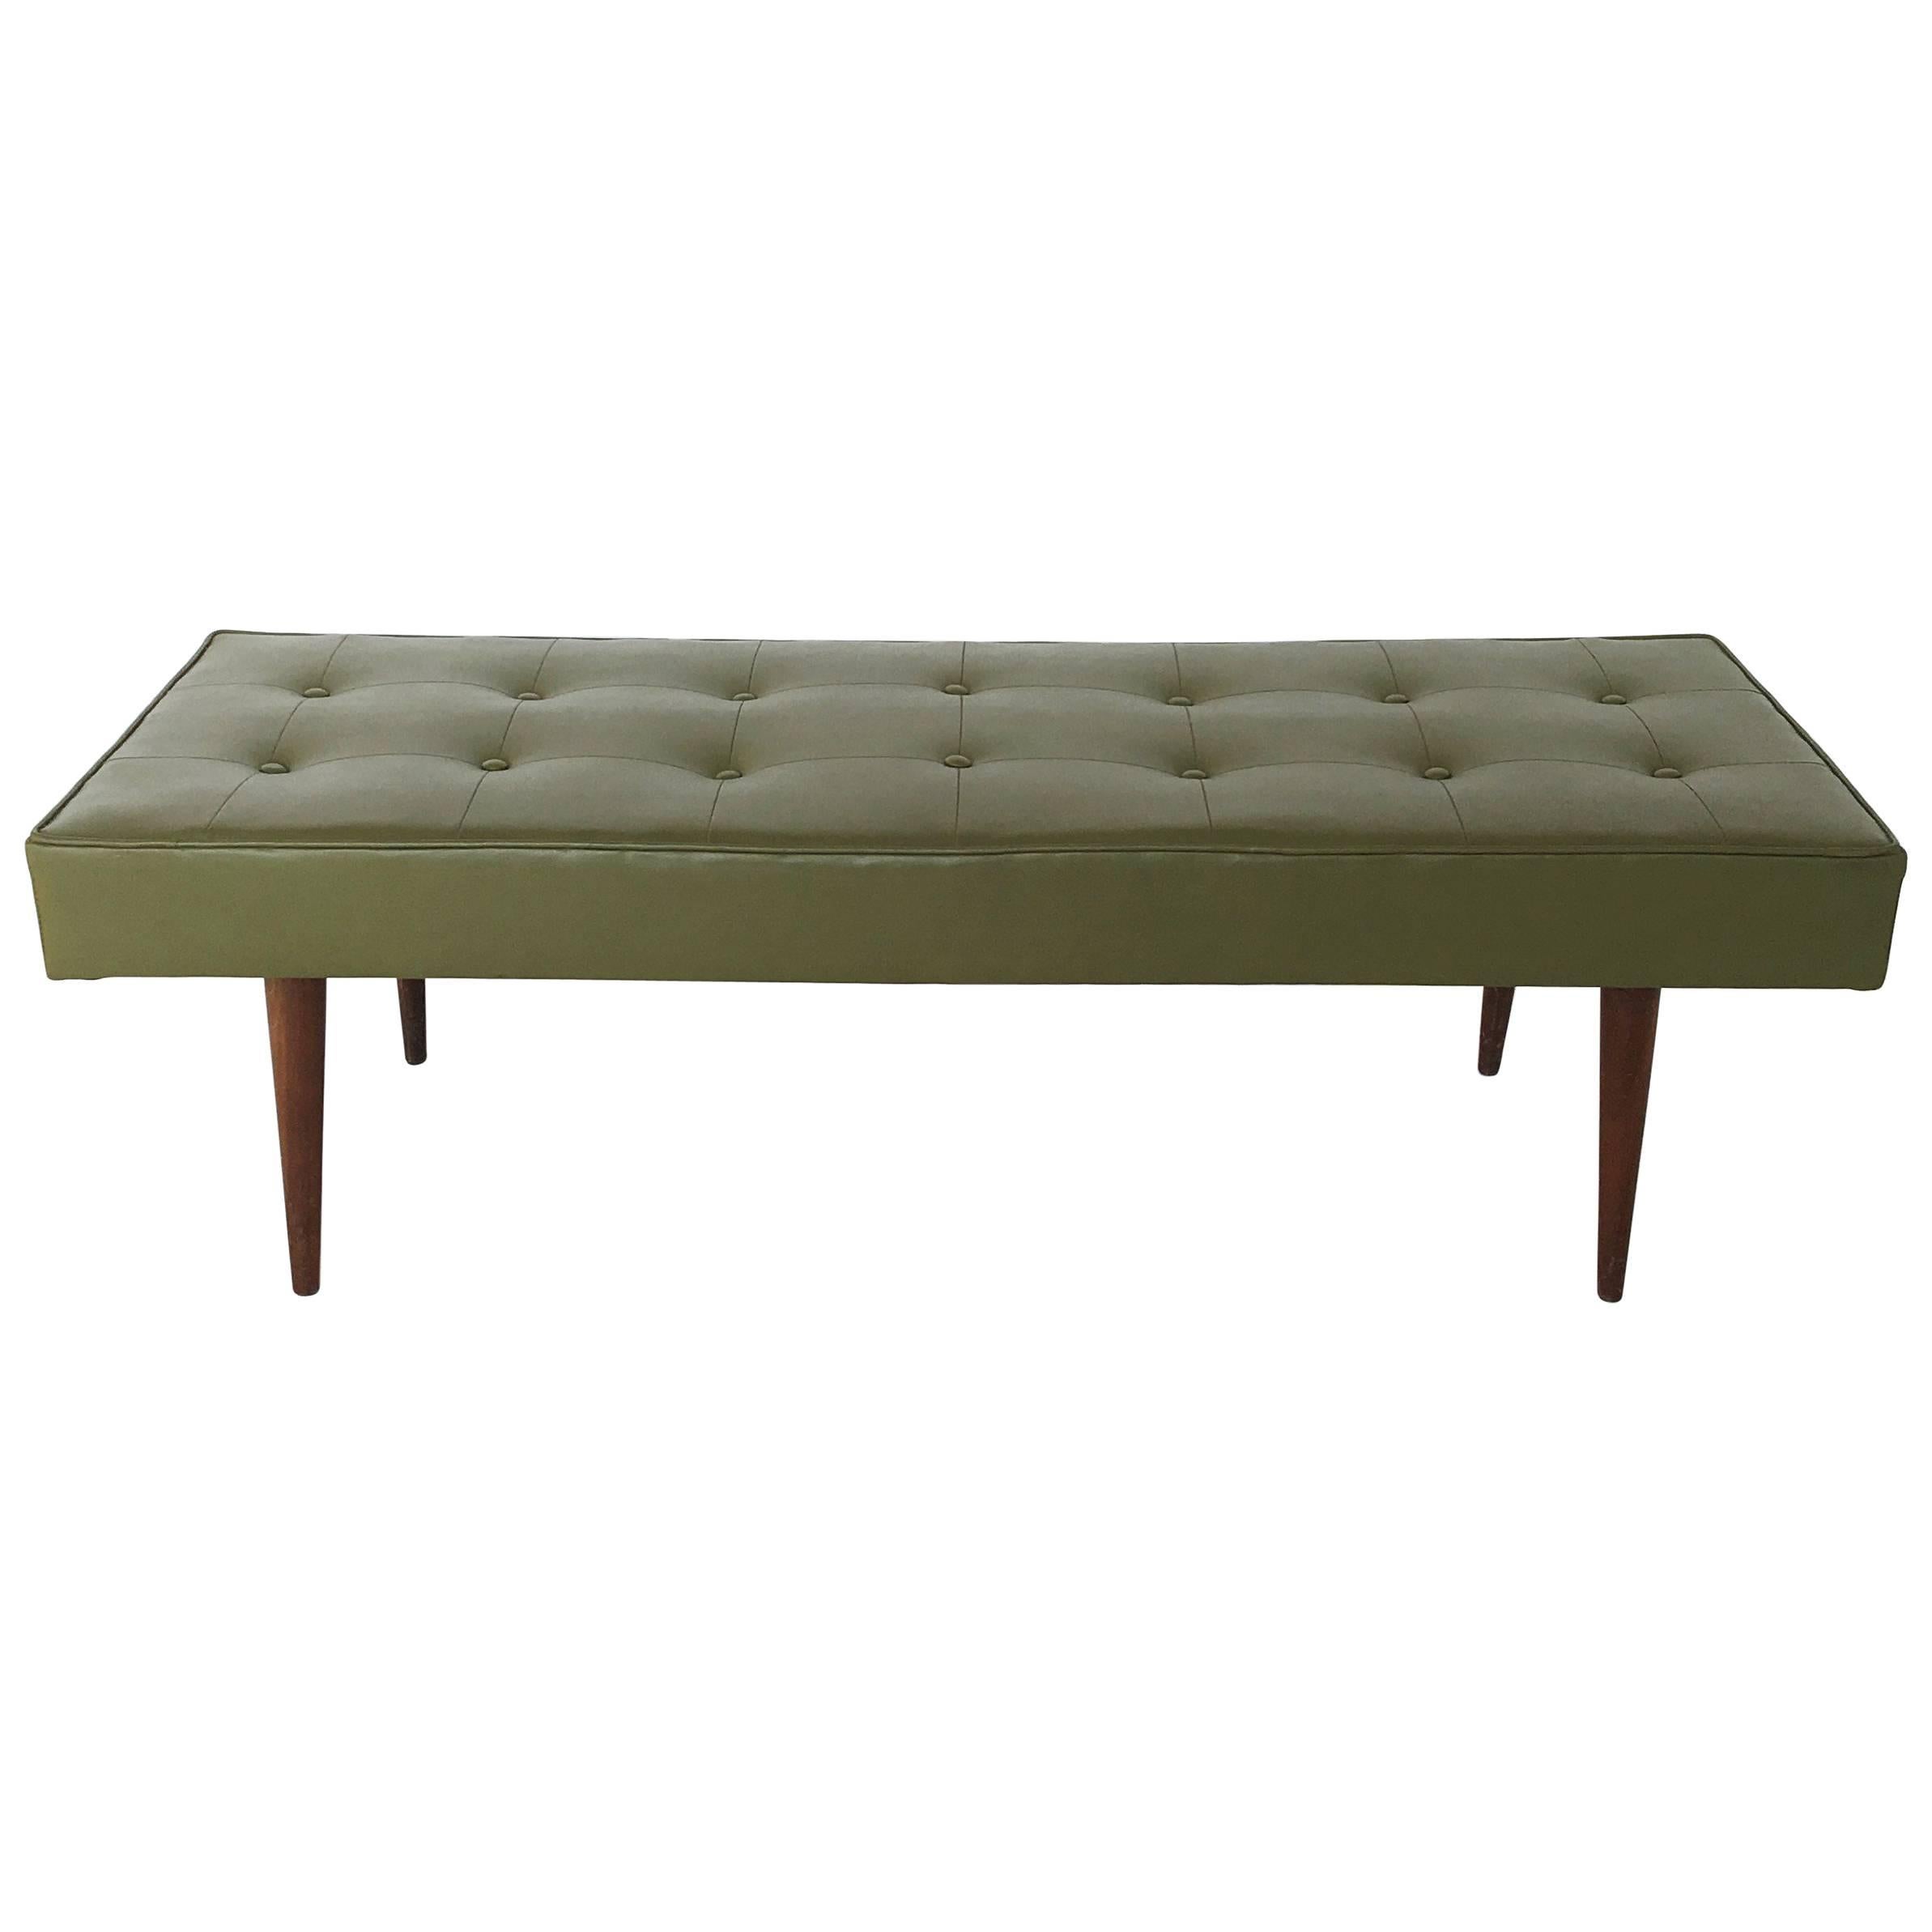 Mid-Century Modern Bench by Milo Baughman for Thayer Coggin For Sale